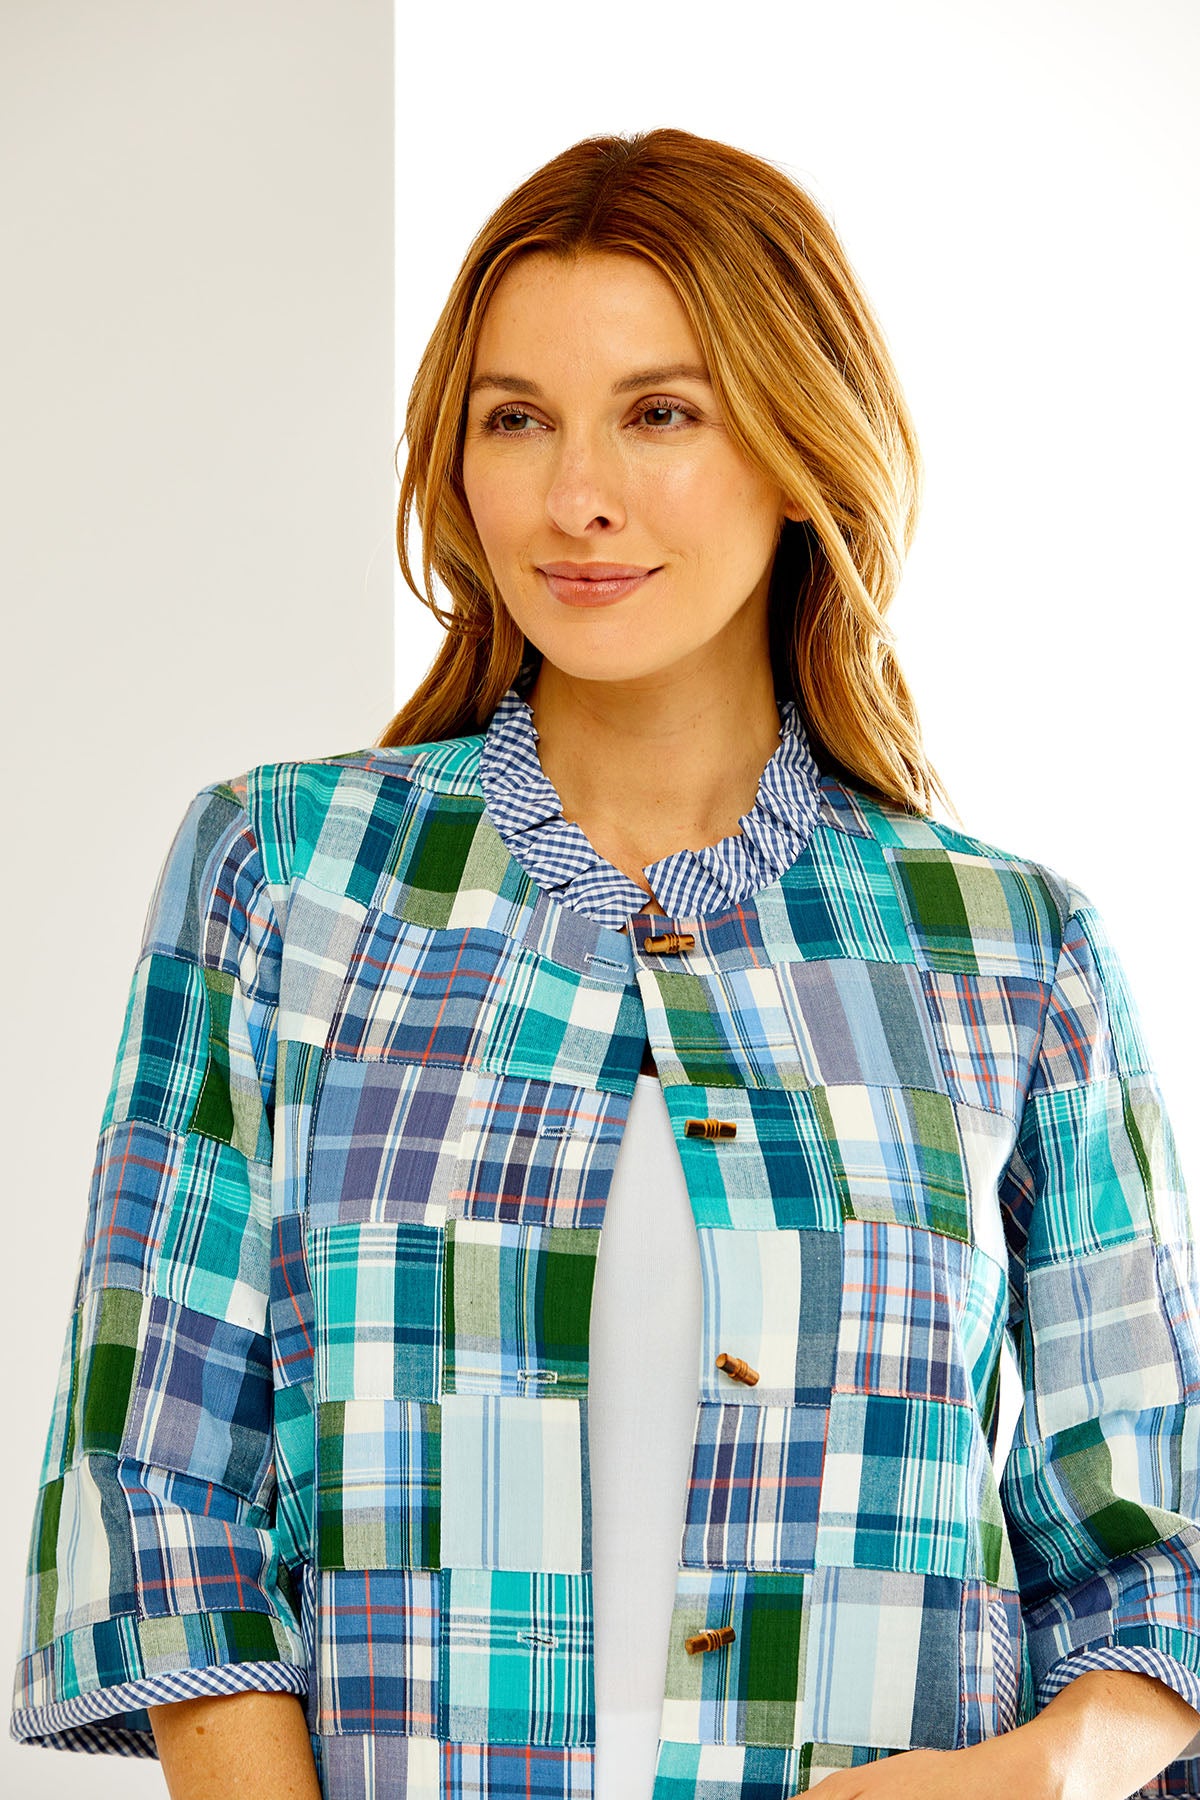 Woman in blue multi-colored madras jacket